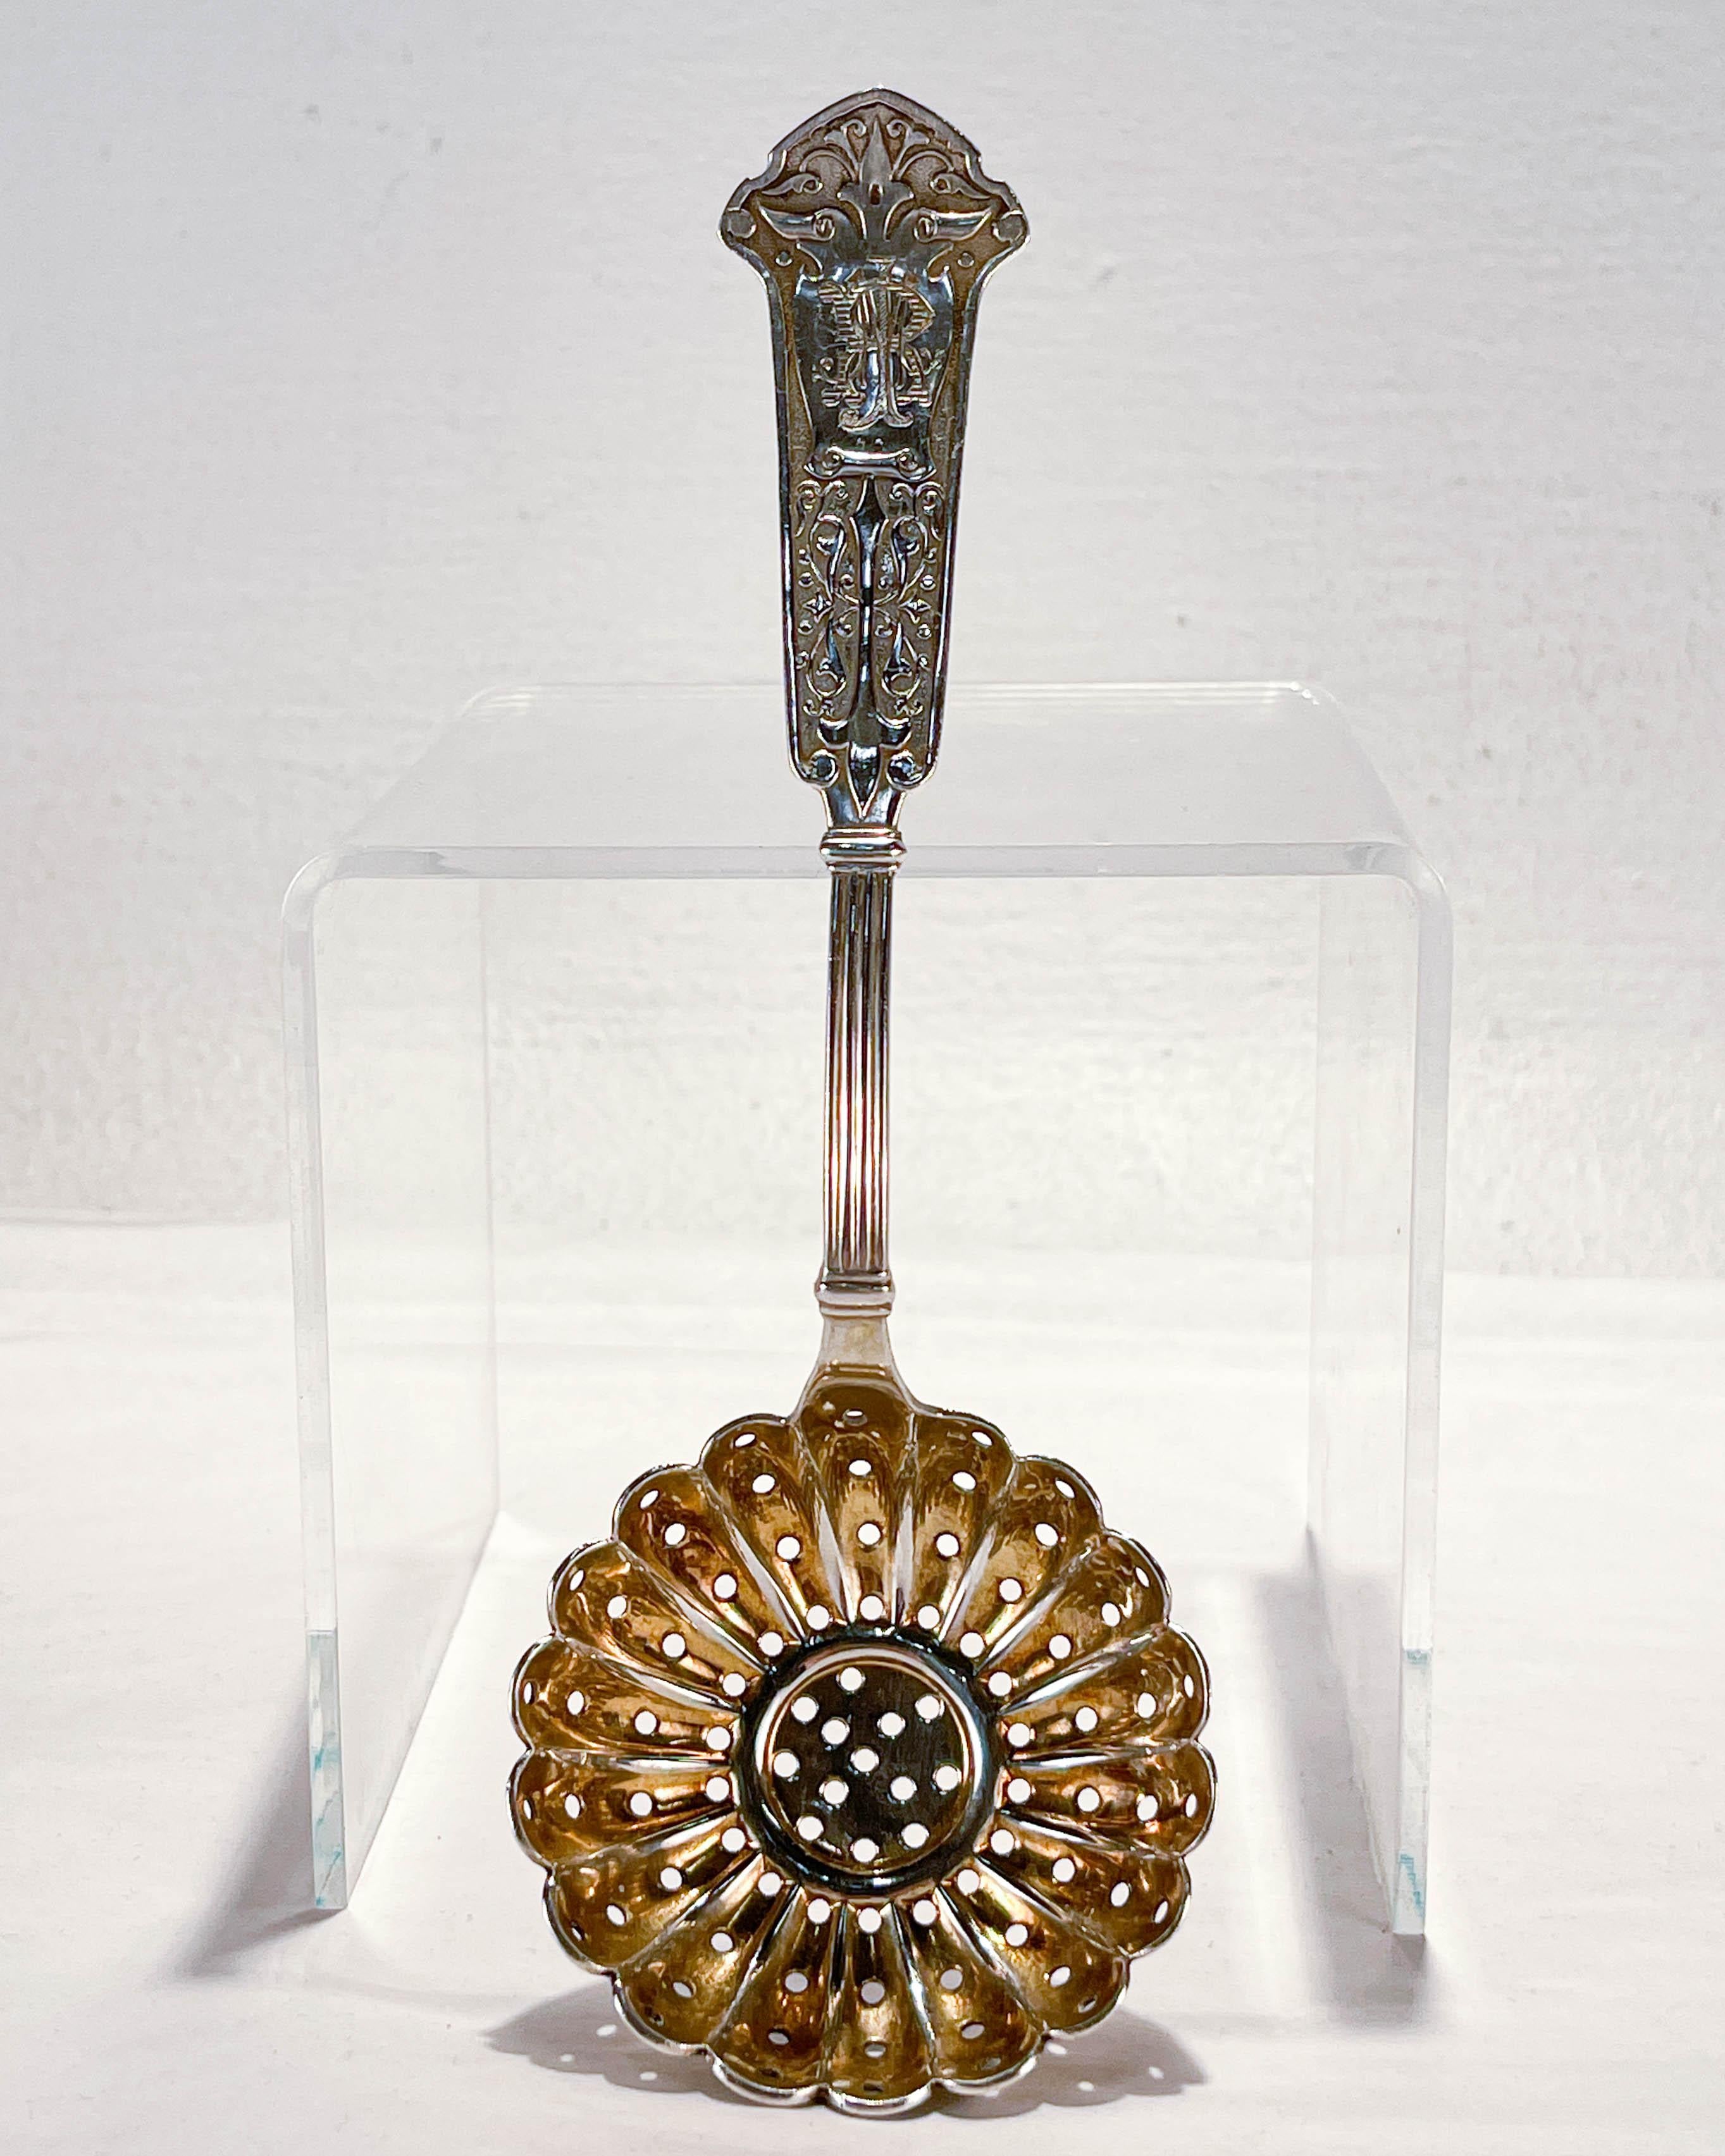 Gilded Age Antique George Sharp Arabesque Pattern Sterling Silver Sugar Sifter For Sale